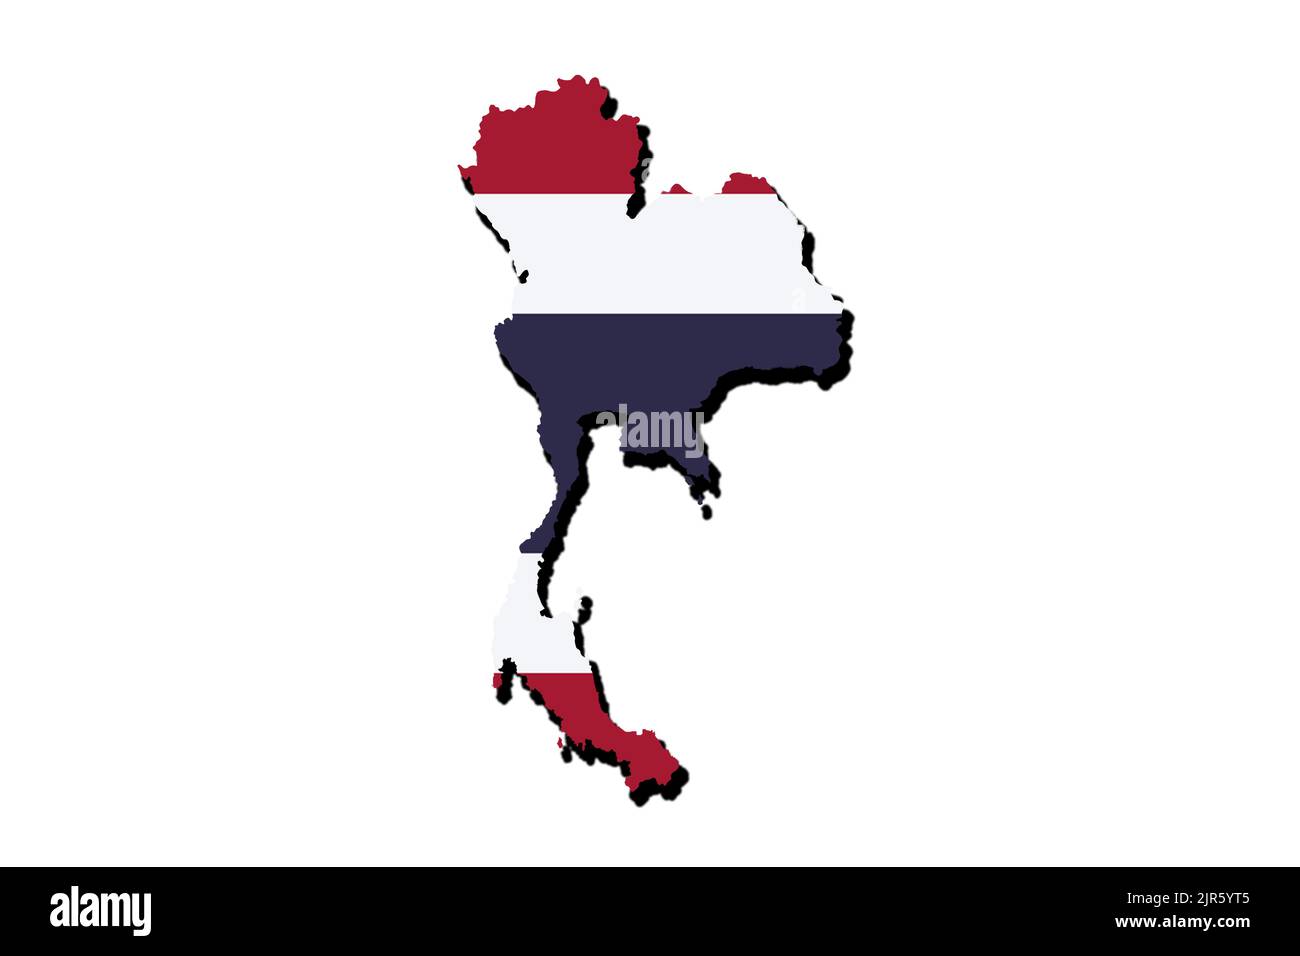 Silhouette of the map of thailand with its flag Stock Photo